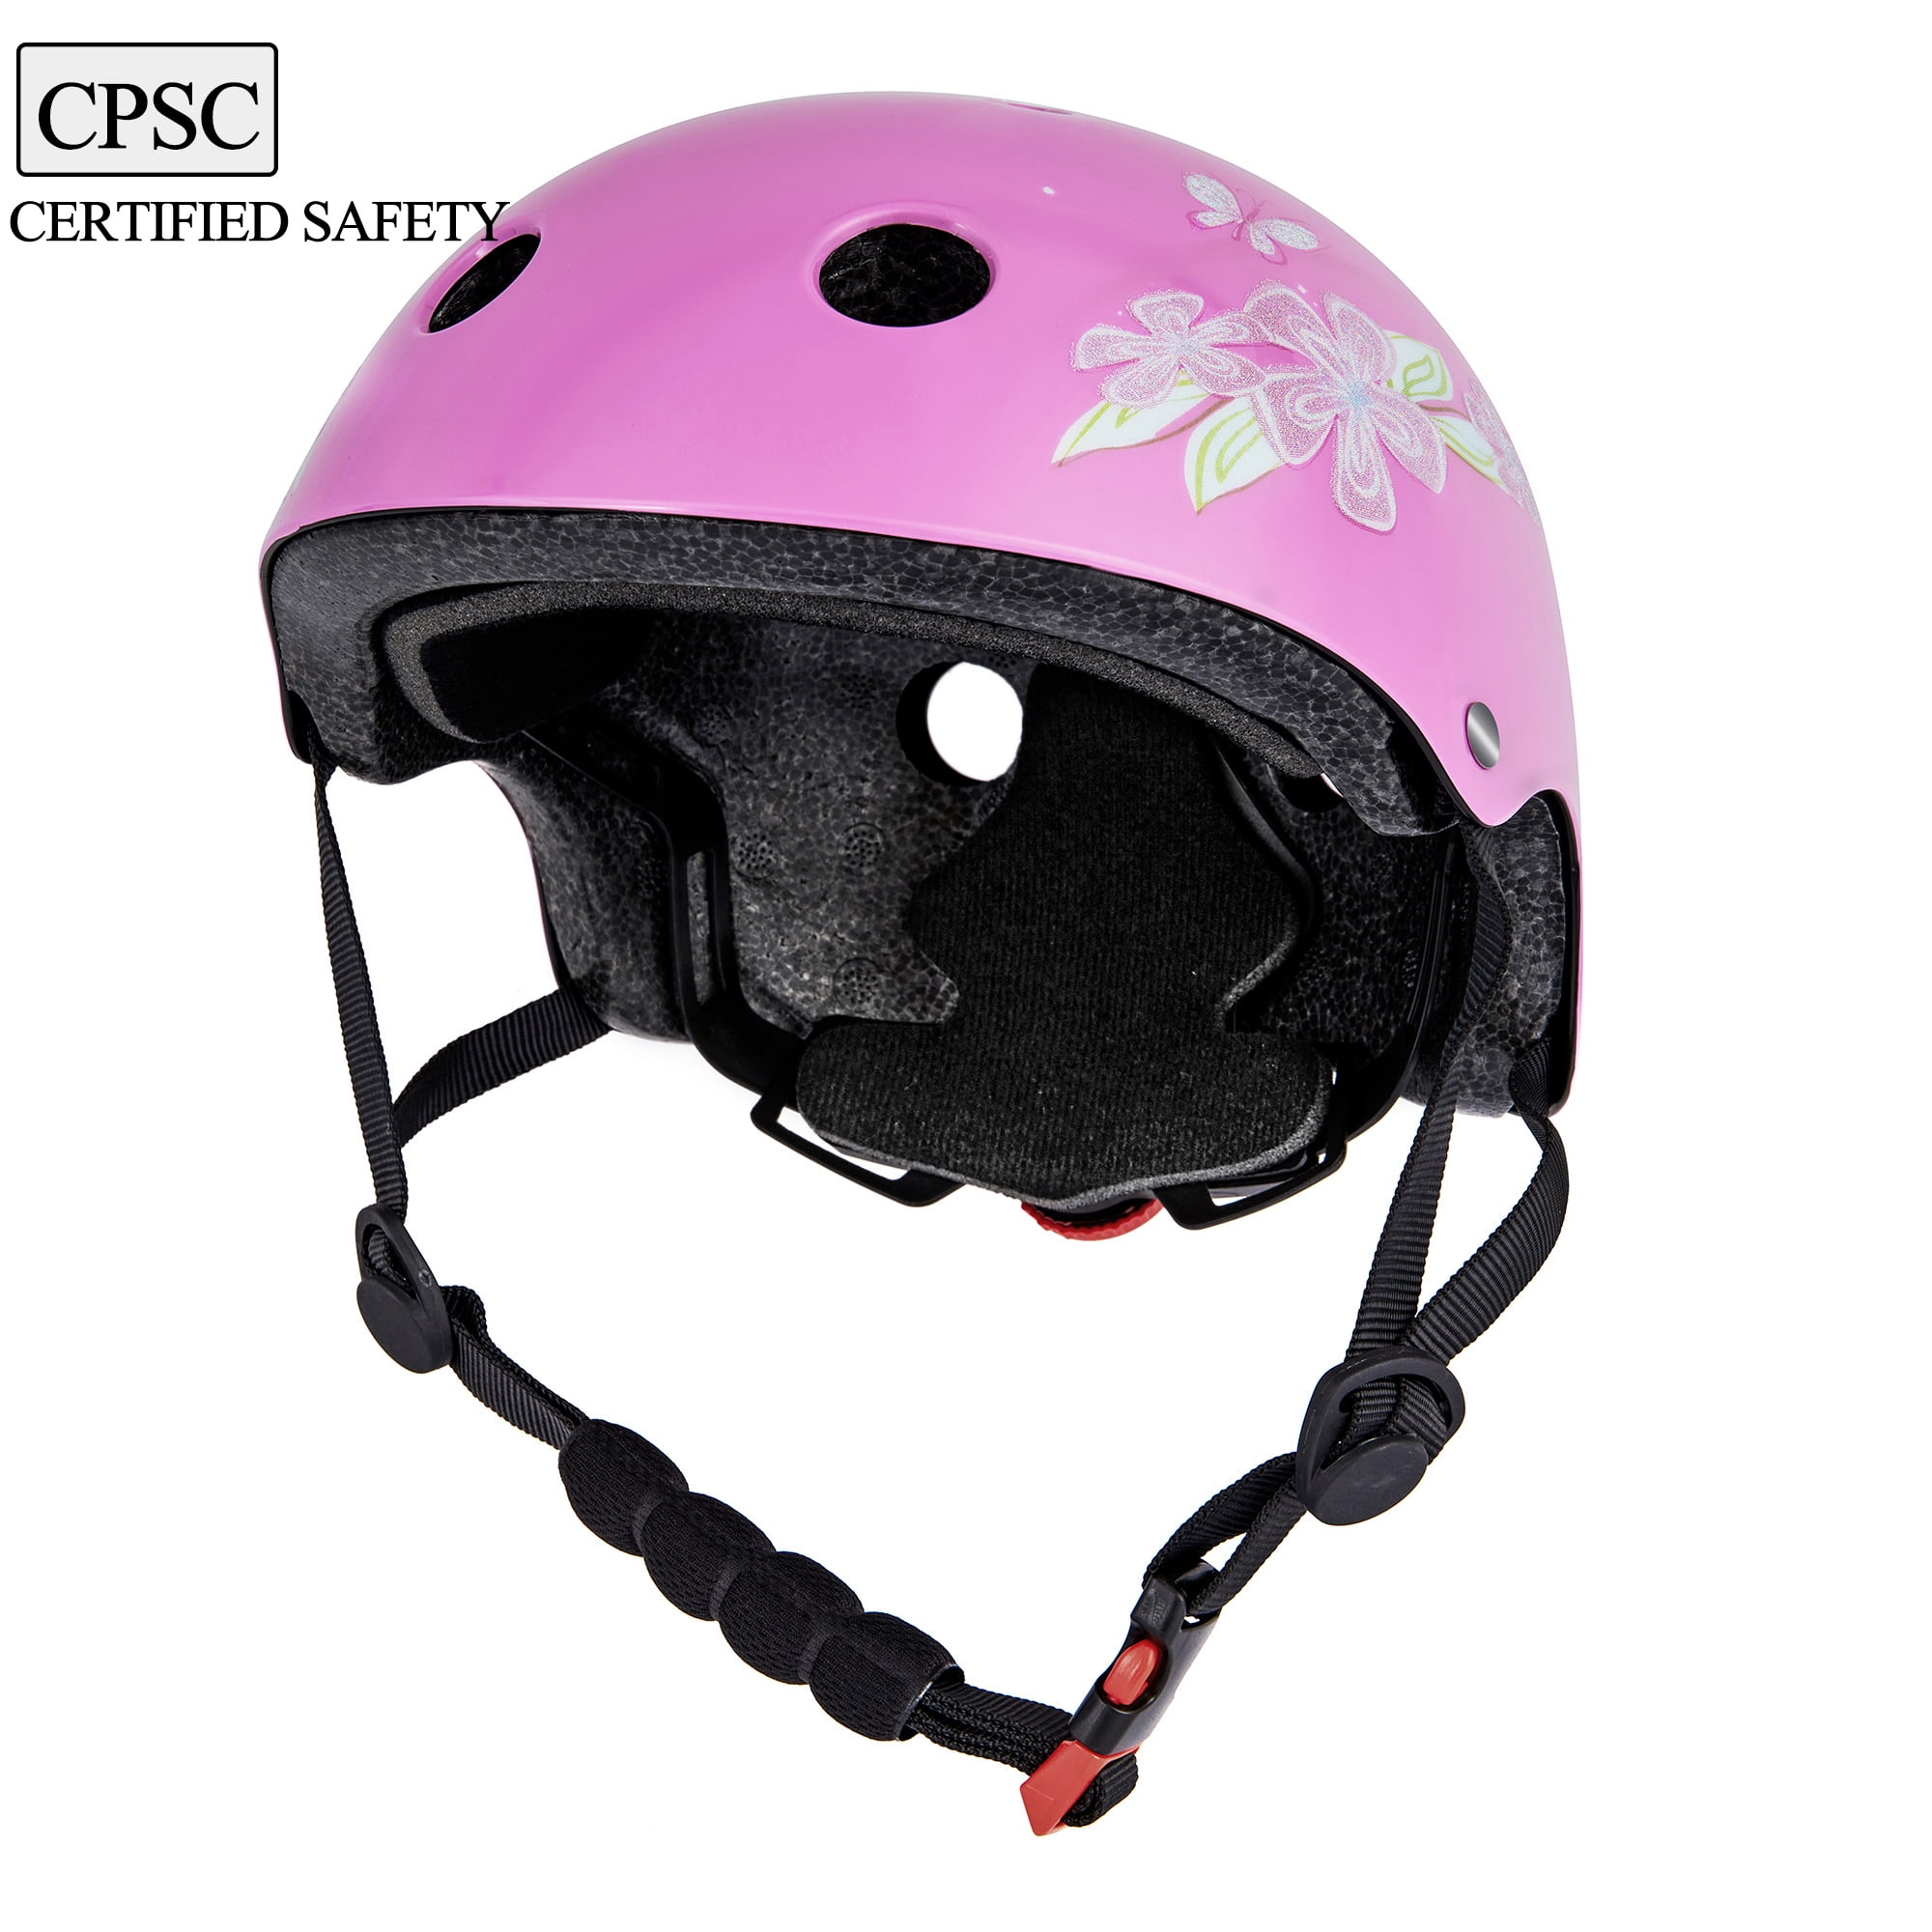 Children Kids Safety Helmets for Bicycle Bike Cycling Scooter Skate Skateboard 